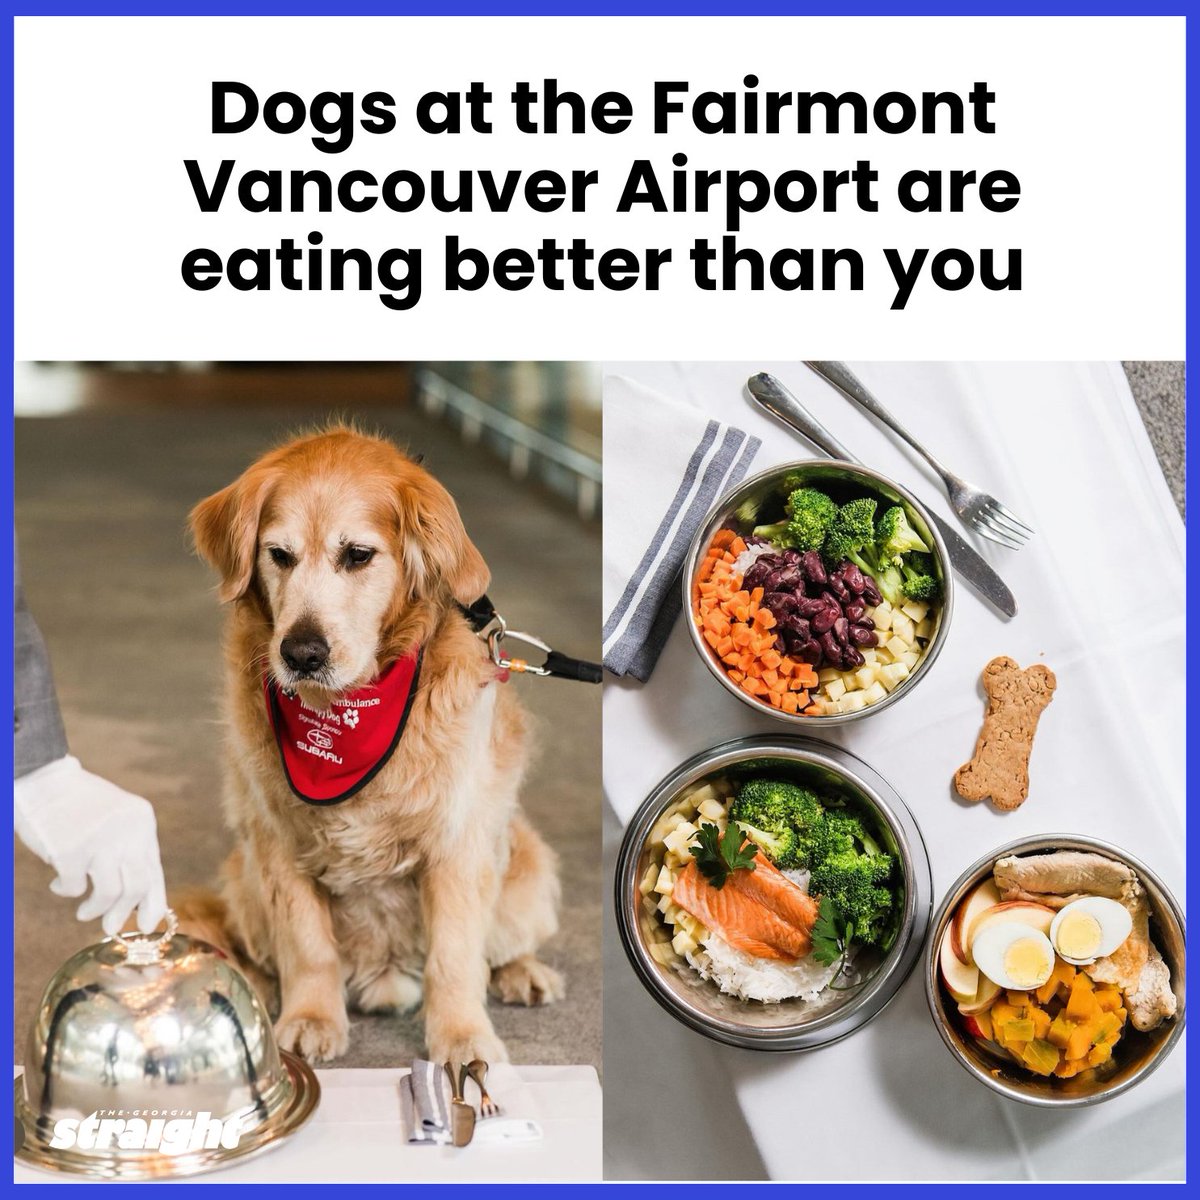 The Fairmont Vancouver Airport has launched a new dog package that includes gourmet bowls of salmon, chicken, and plant-based meals for your furry friends. Can't remember the last time we ate this good. 🤔